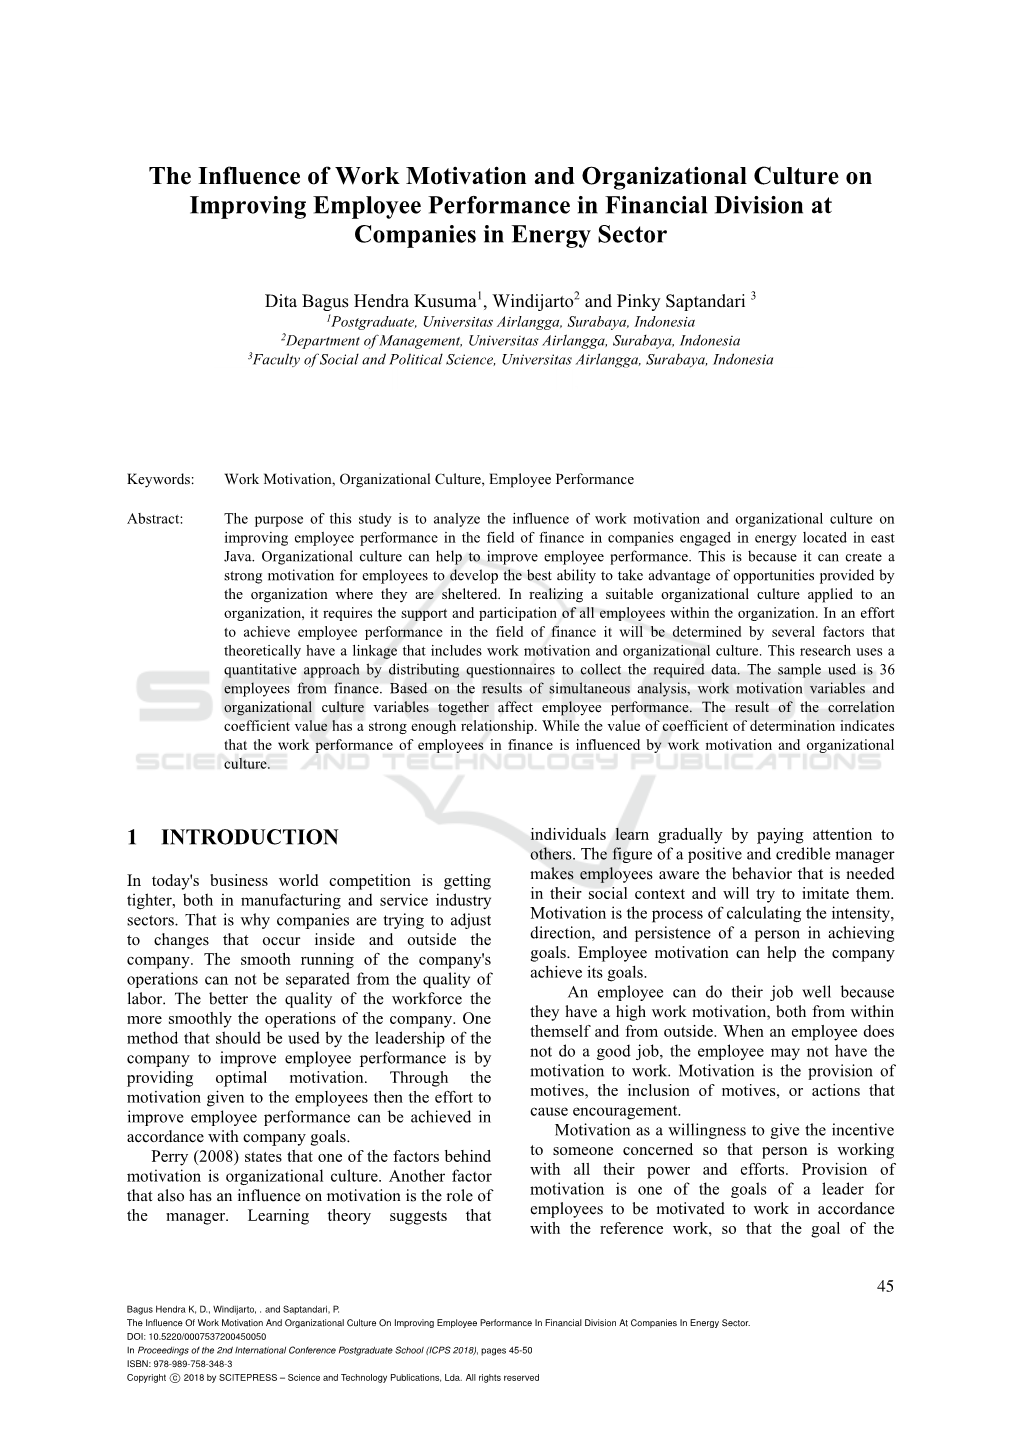 The Influence of Work Motivation and Organizational Culture on Improving Employee Performance in Financial Division at Companies in Energy Sector